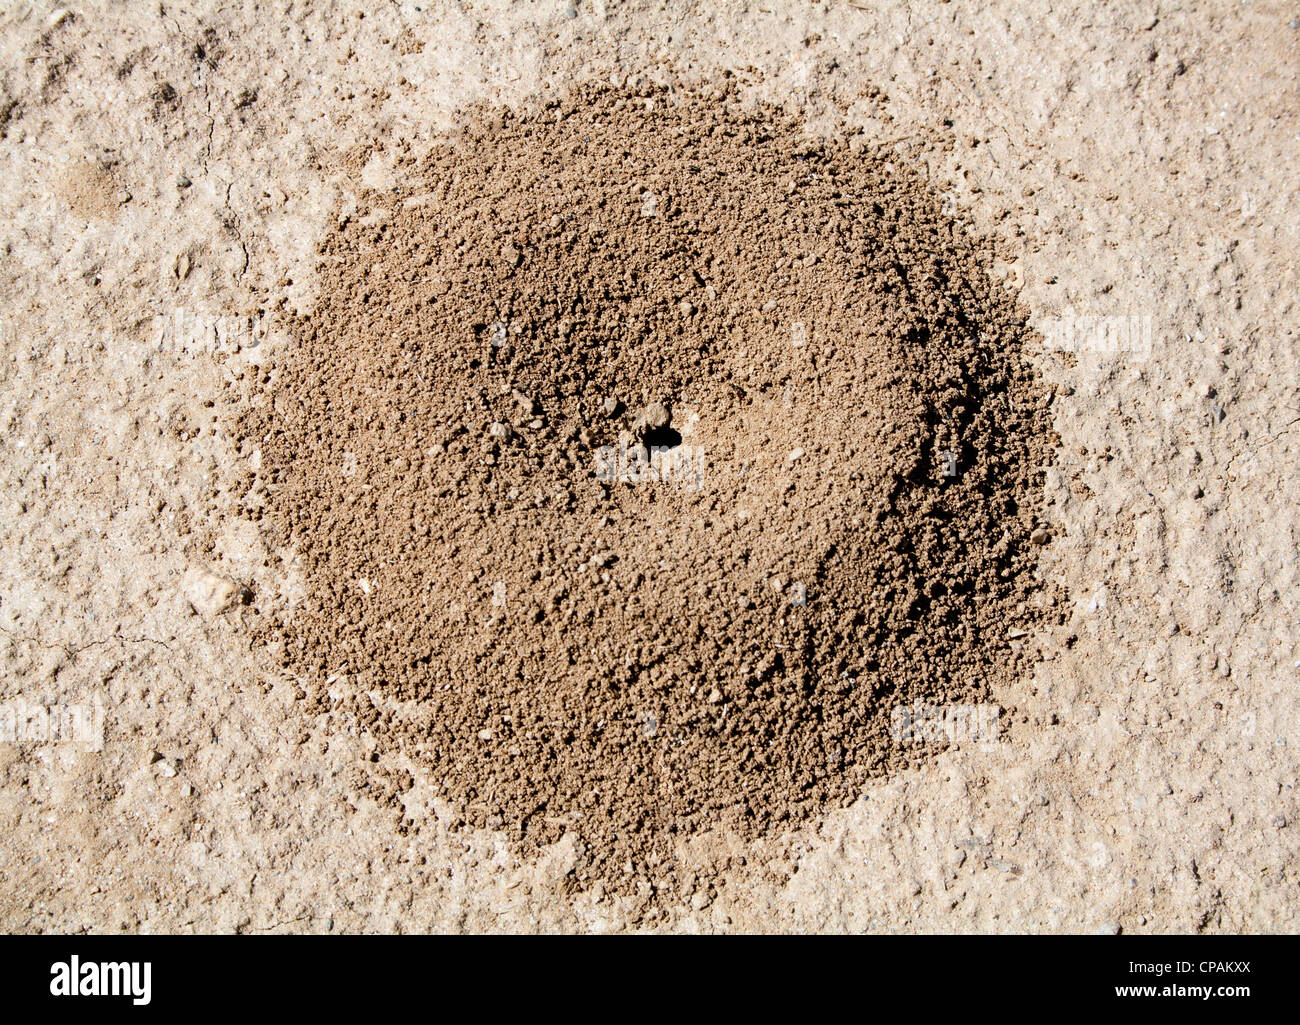 Close-up image of anthill in soil Stock Photo